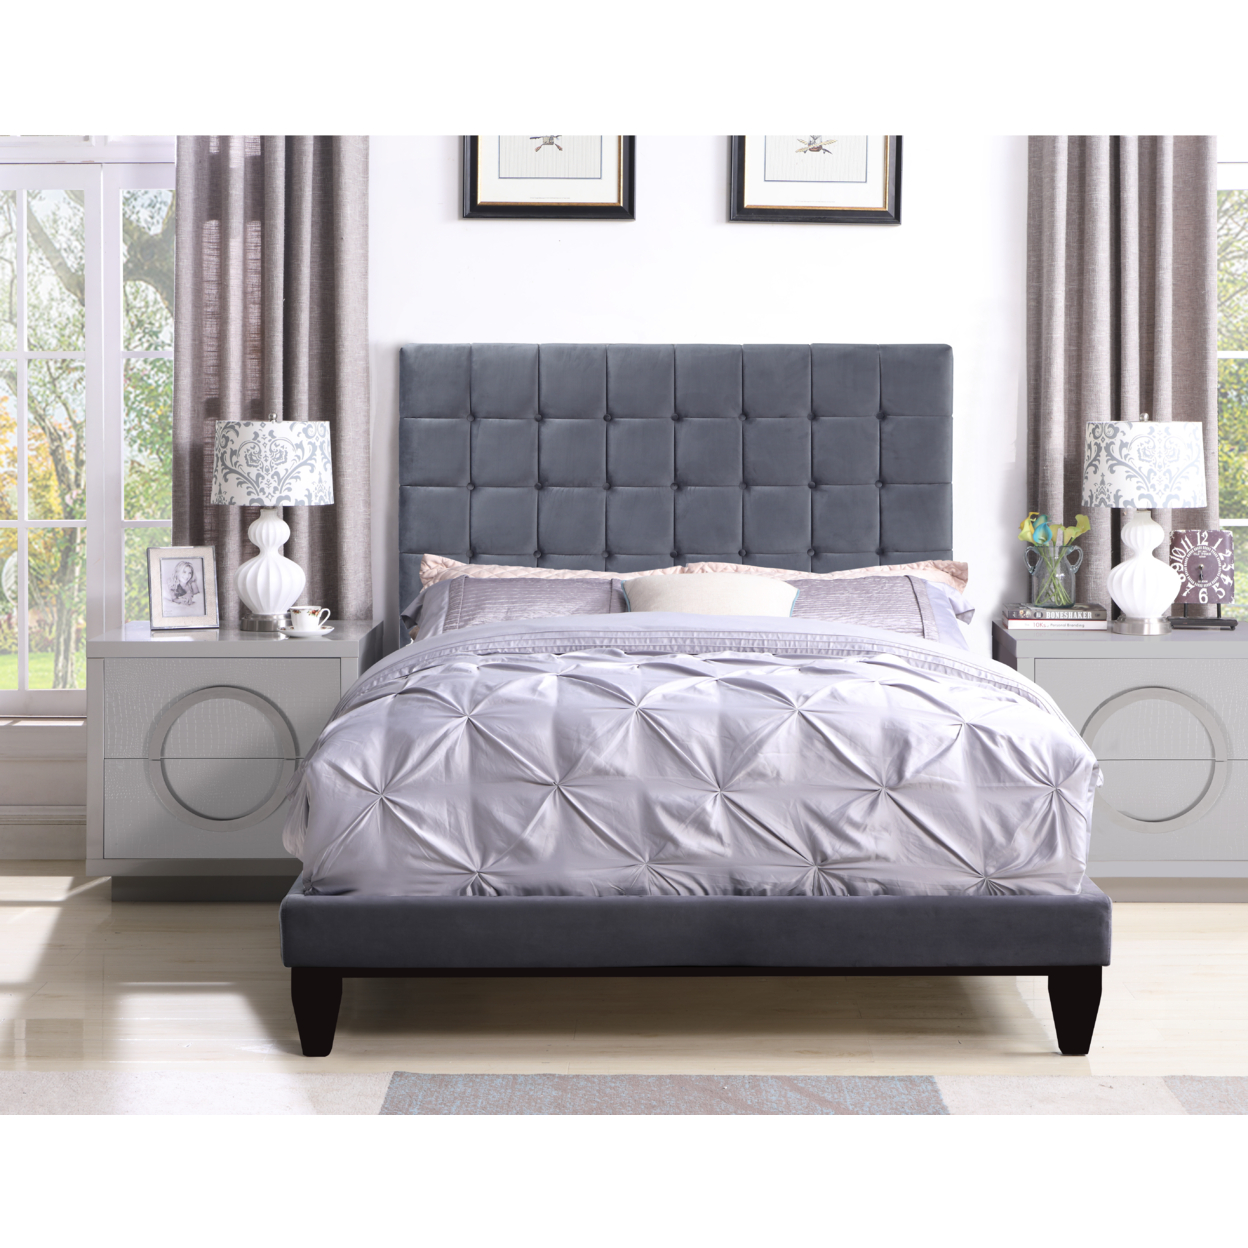 Chopin Bed Frame With Headboard Velvet Upholstered Button Tufted Tapered Birch Legs - Grey, Queen